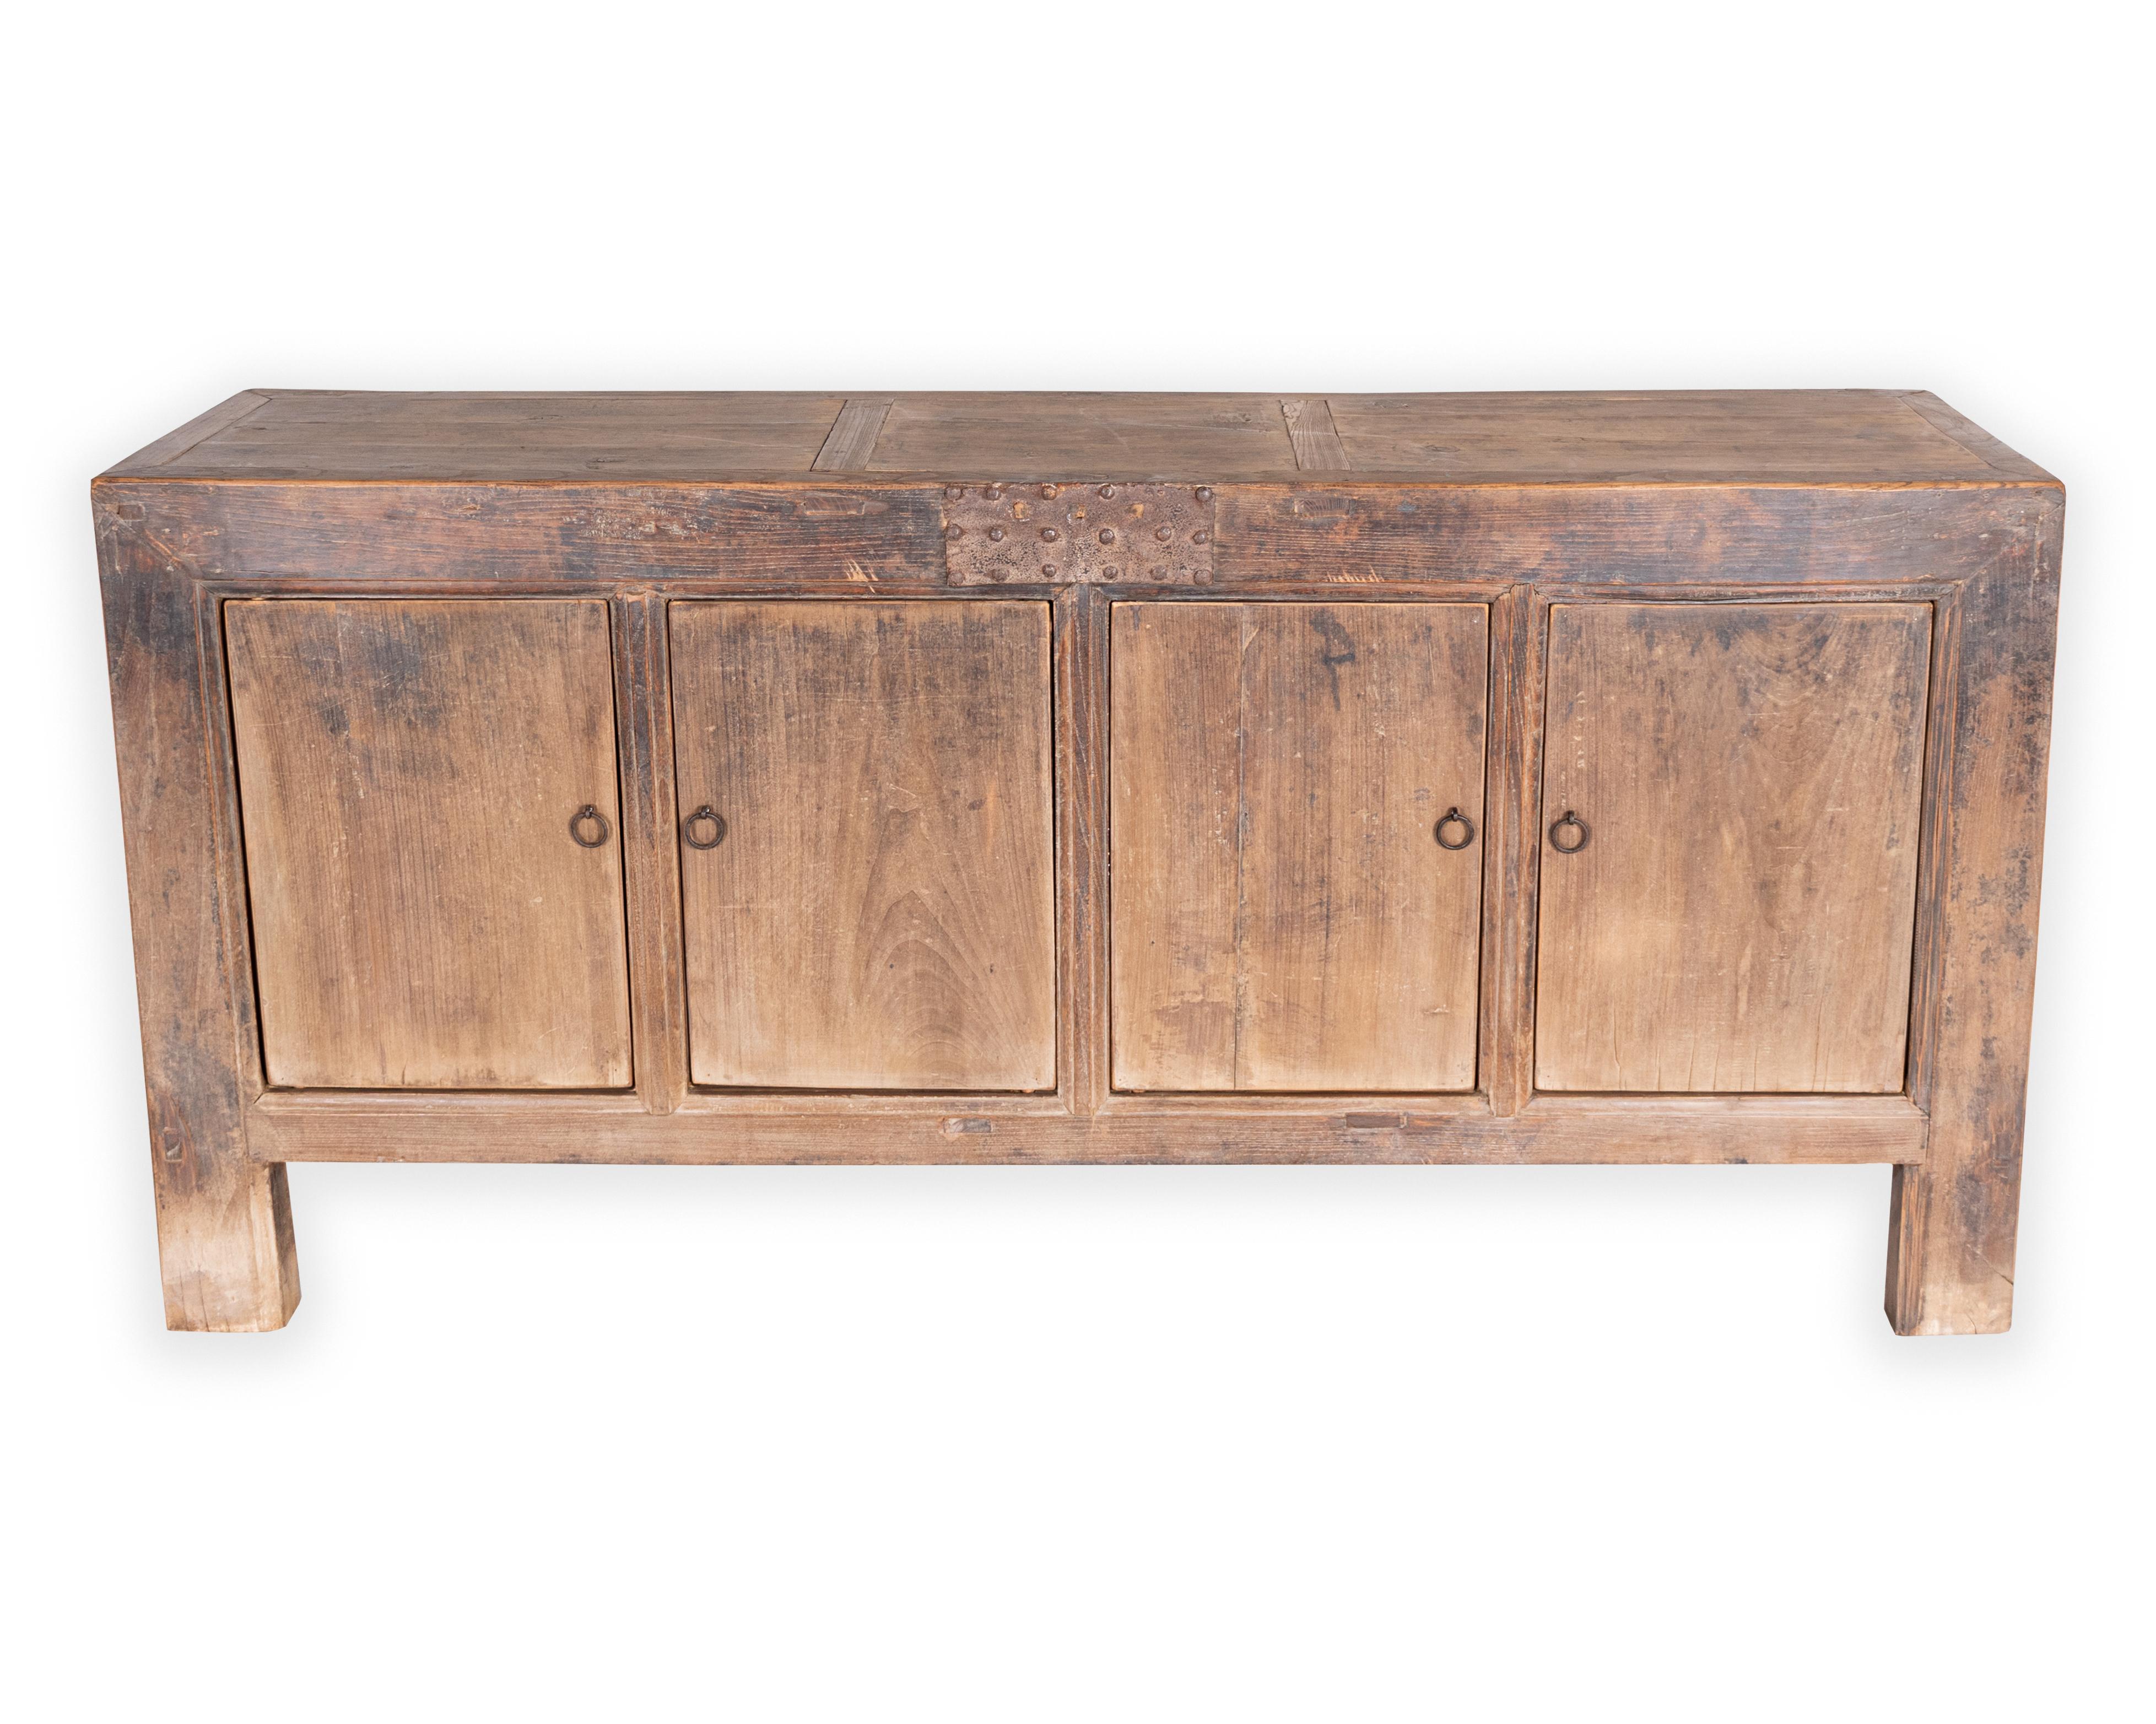 Four door bleached elm server. 

Piece from our one of a kind line, Le Monde. Exclusive to Brendan Bass.